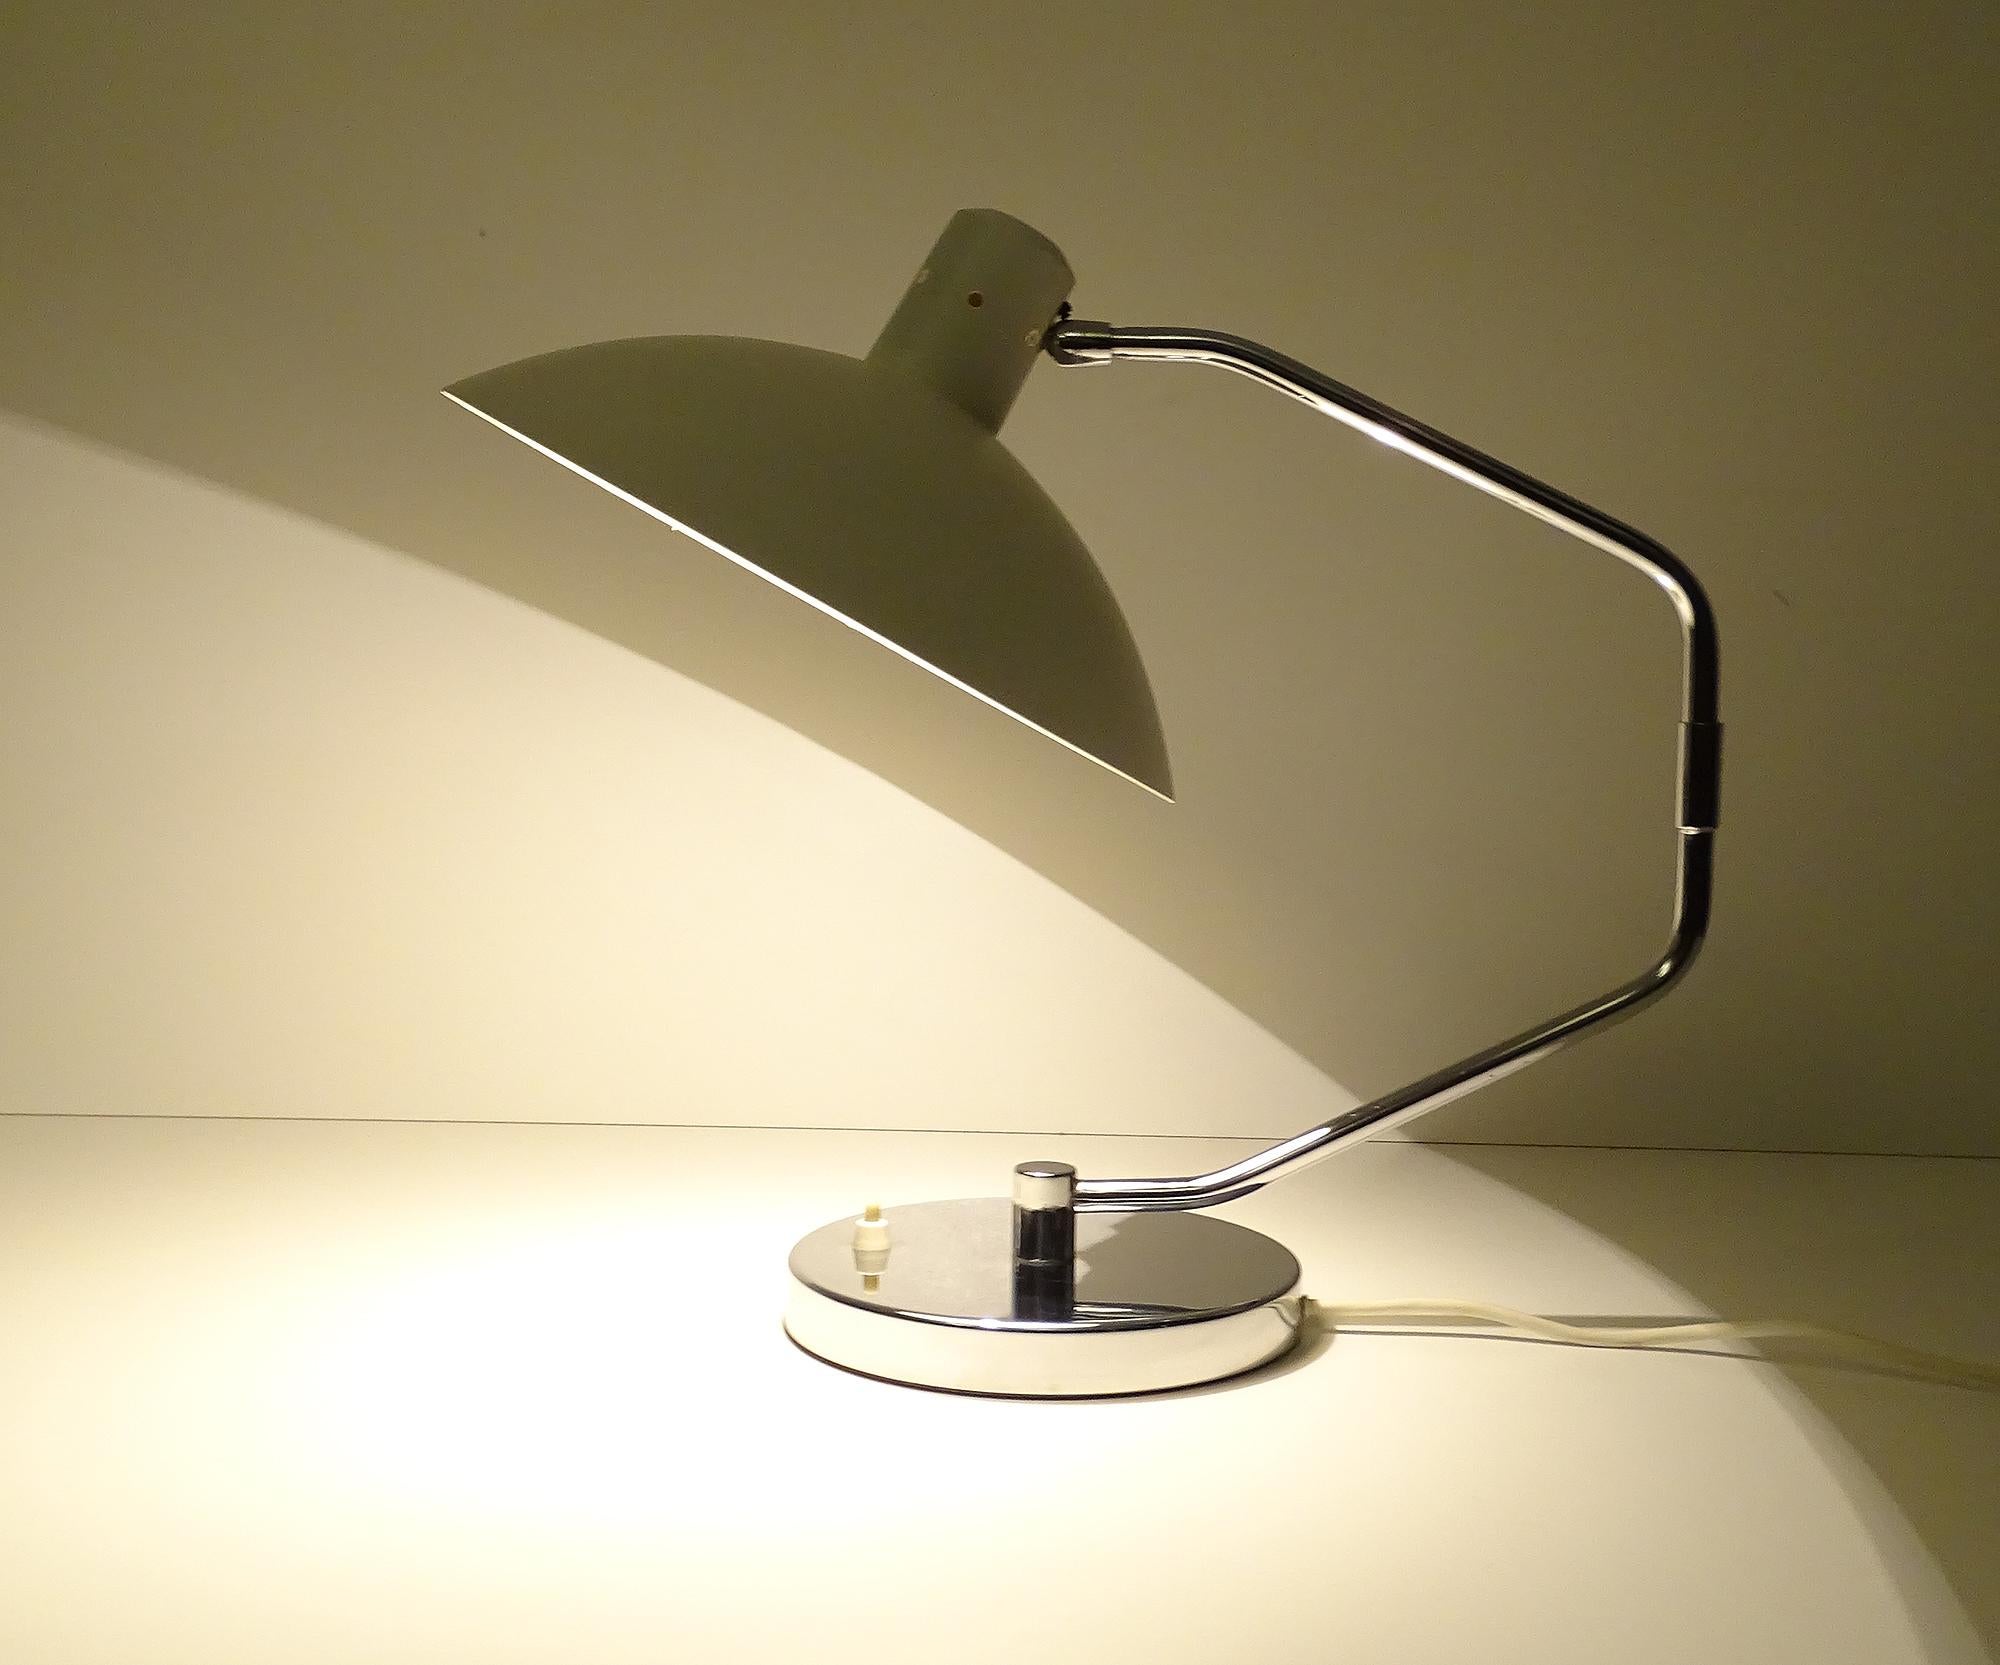 Large 1960s Clay Michie desk lamp No. 8 for Knoll International, tilting white enameled shade on double swiveling arm, the angle of the shade itself can also be adjusted. Rewired,  The lamps have been tested with US American light bulbs under 120v